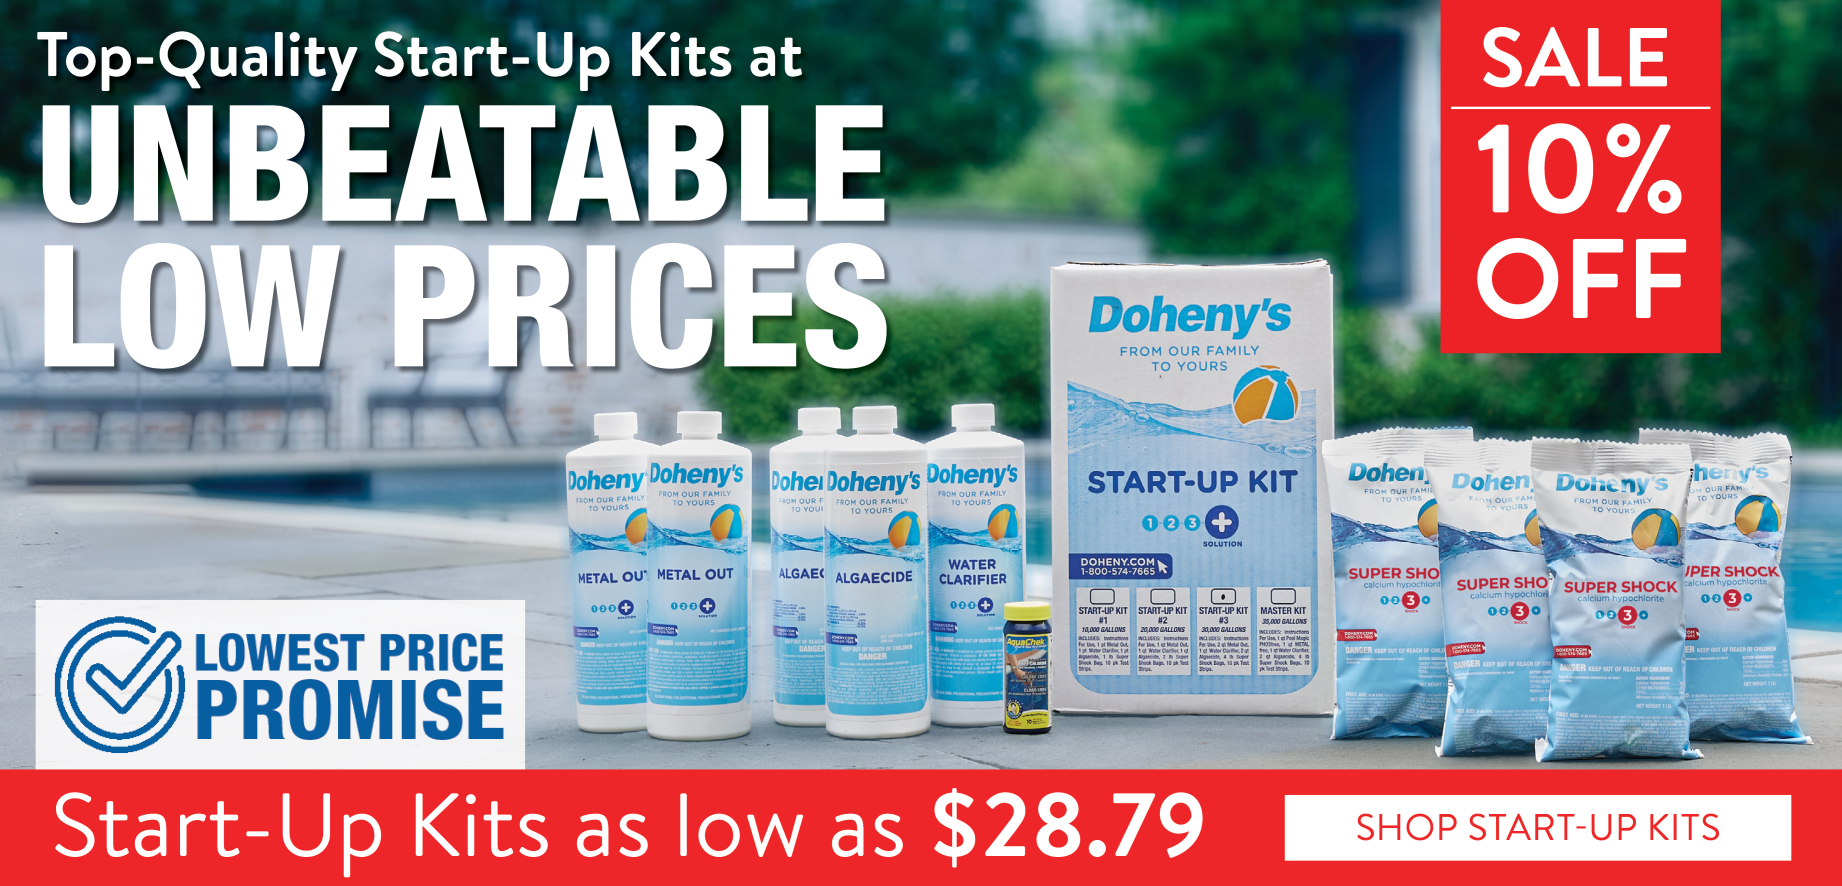 Top quality start-up kits at unbeatable low prices! 10% Off. Lowest Price Promise. Starting at $28.79. Shop now.